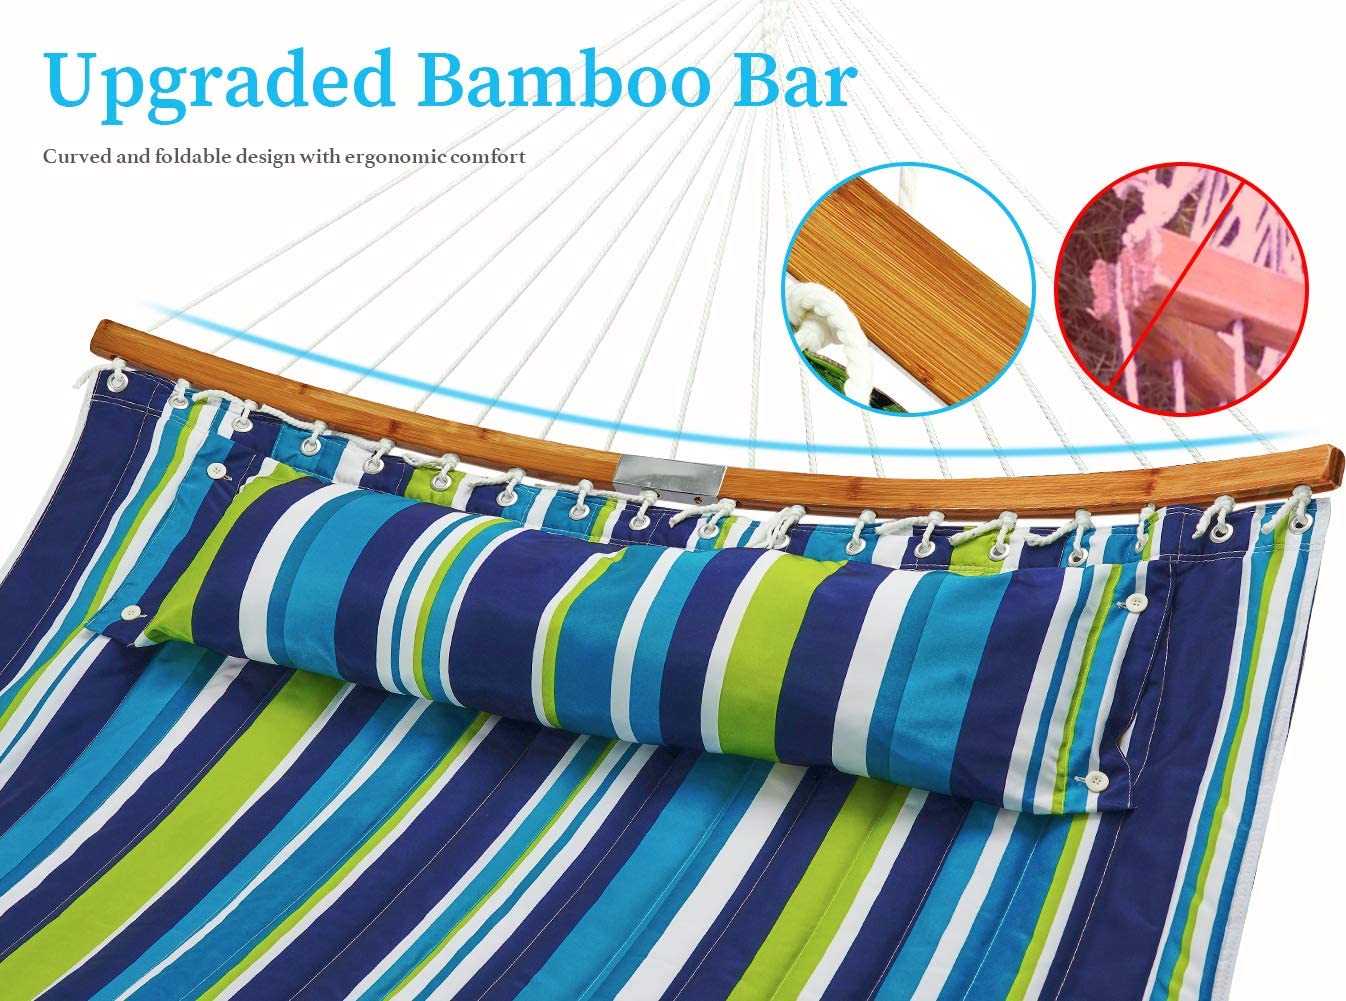 12 FT Curved Bar Hammock with Stand - Upgraded Bamboo Bar